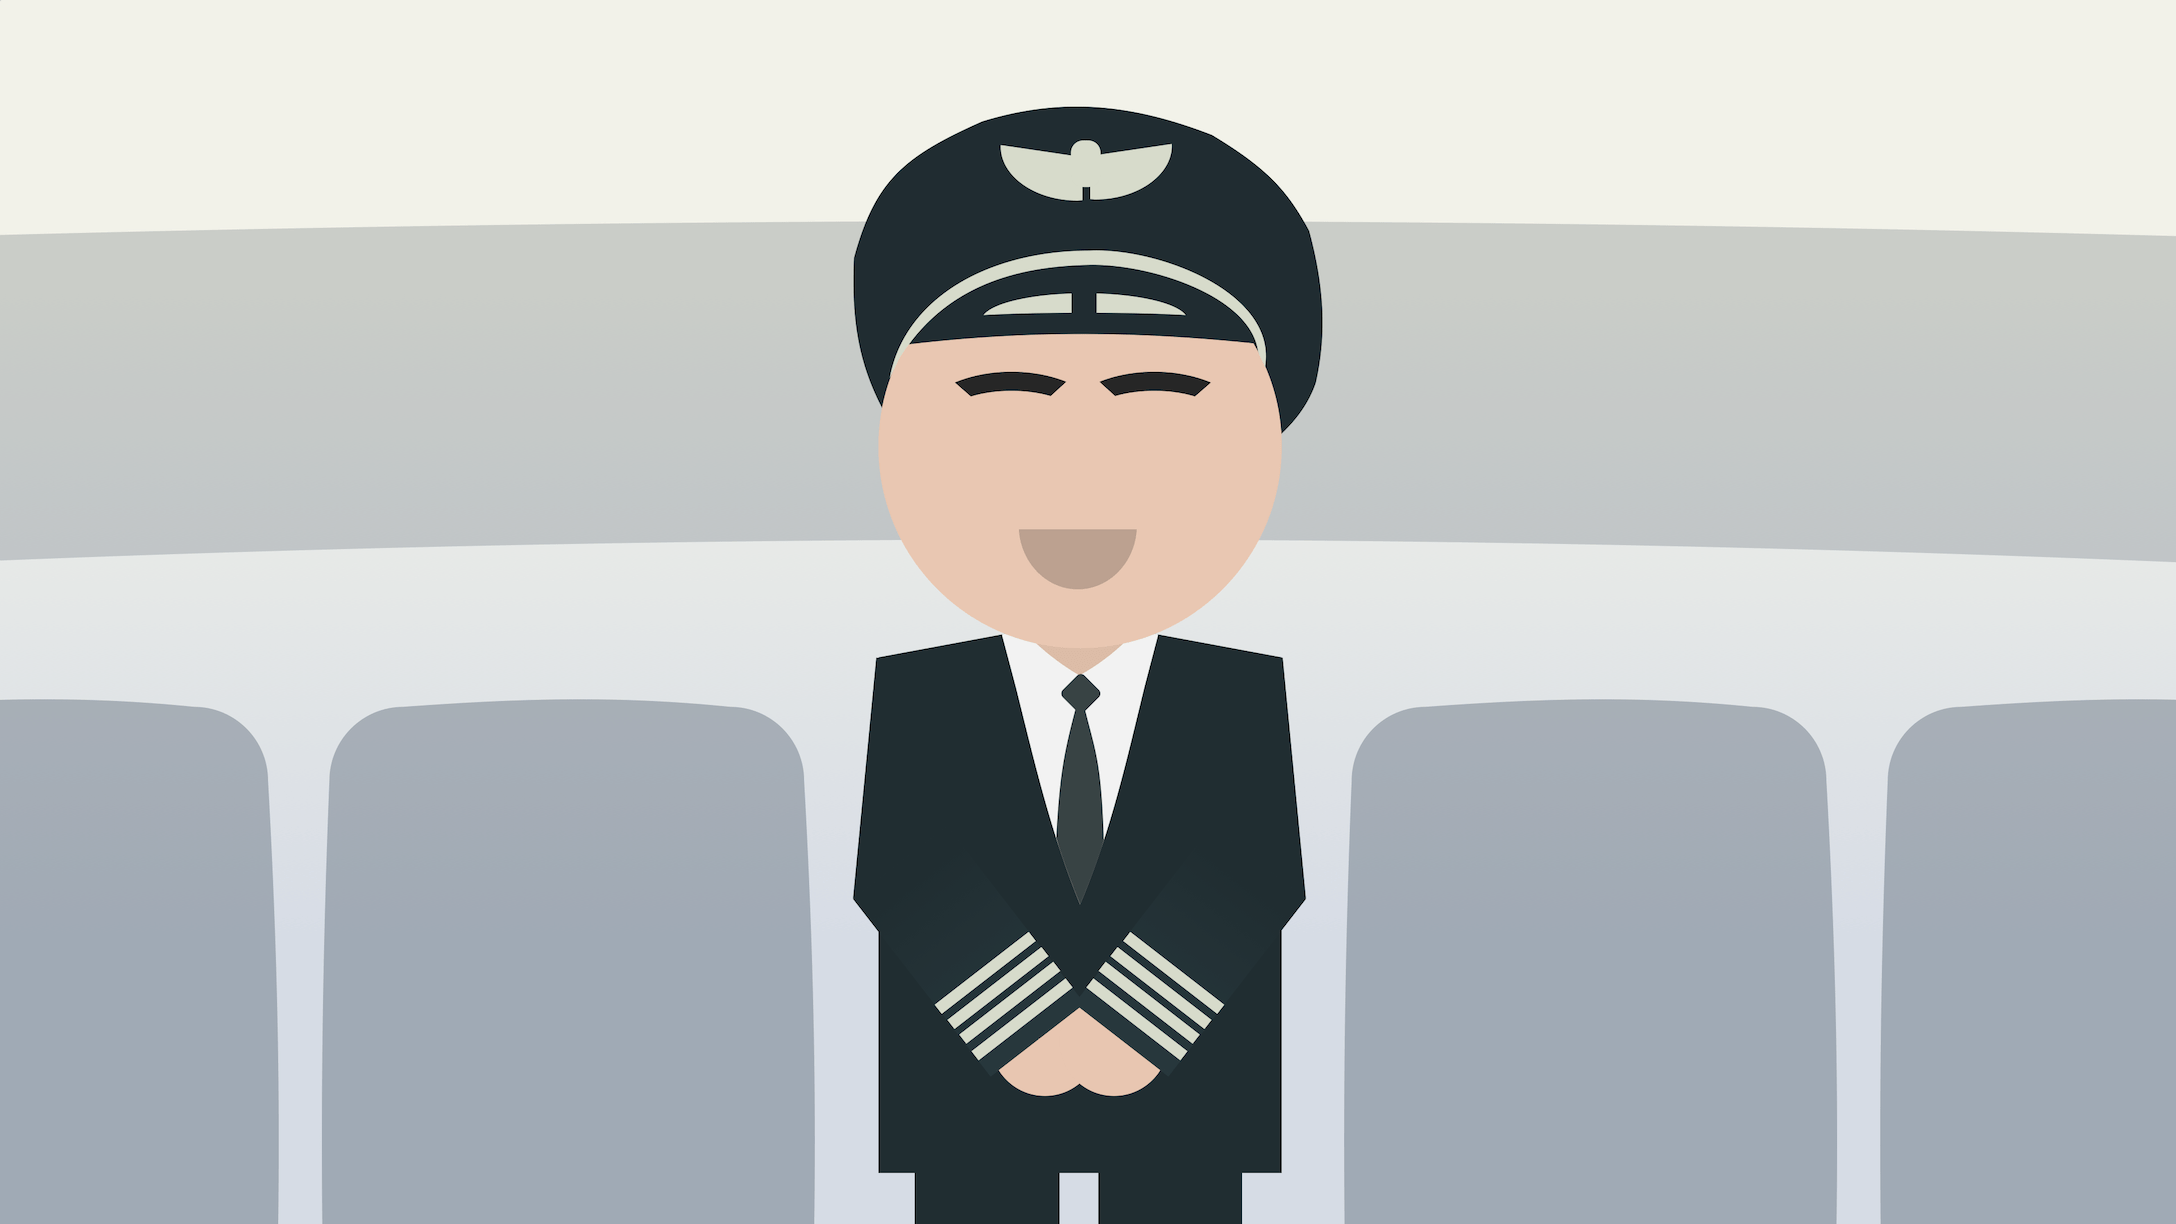 A pilot speaks to its passengers